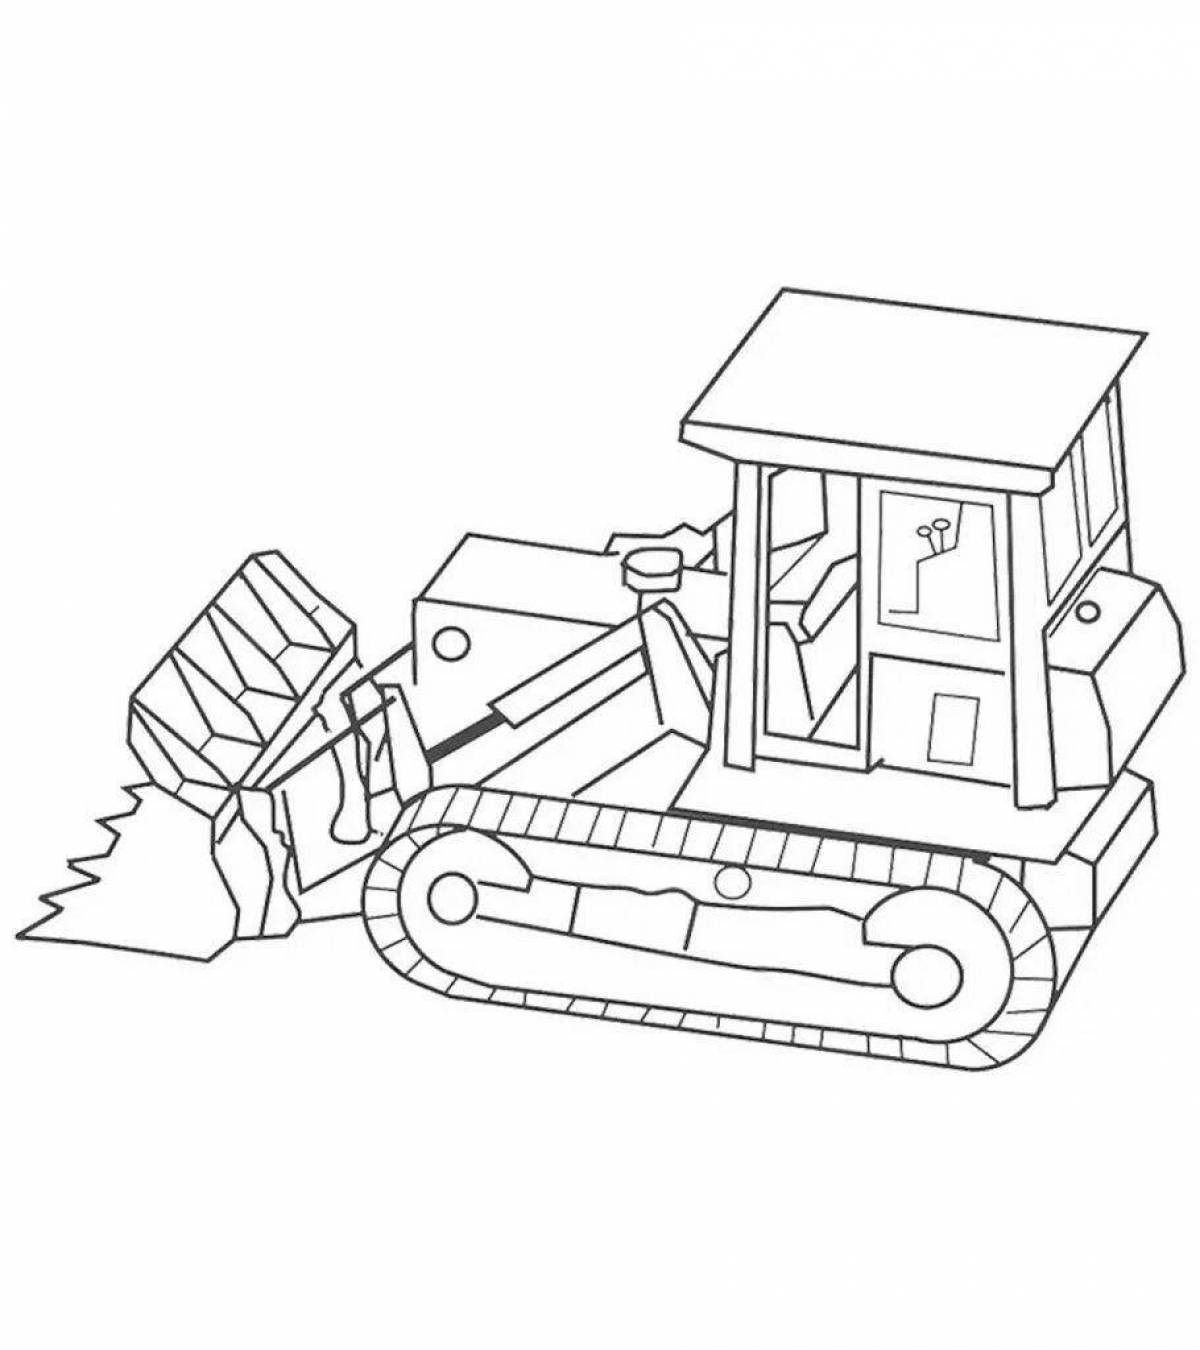 Humorous tractor robot coloring book